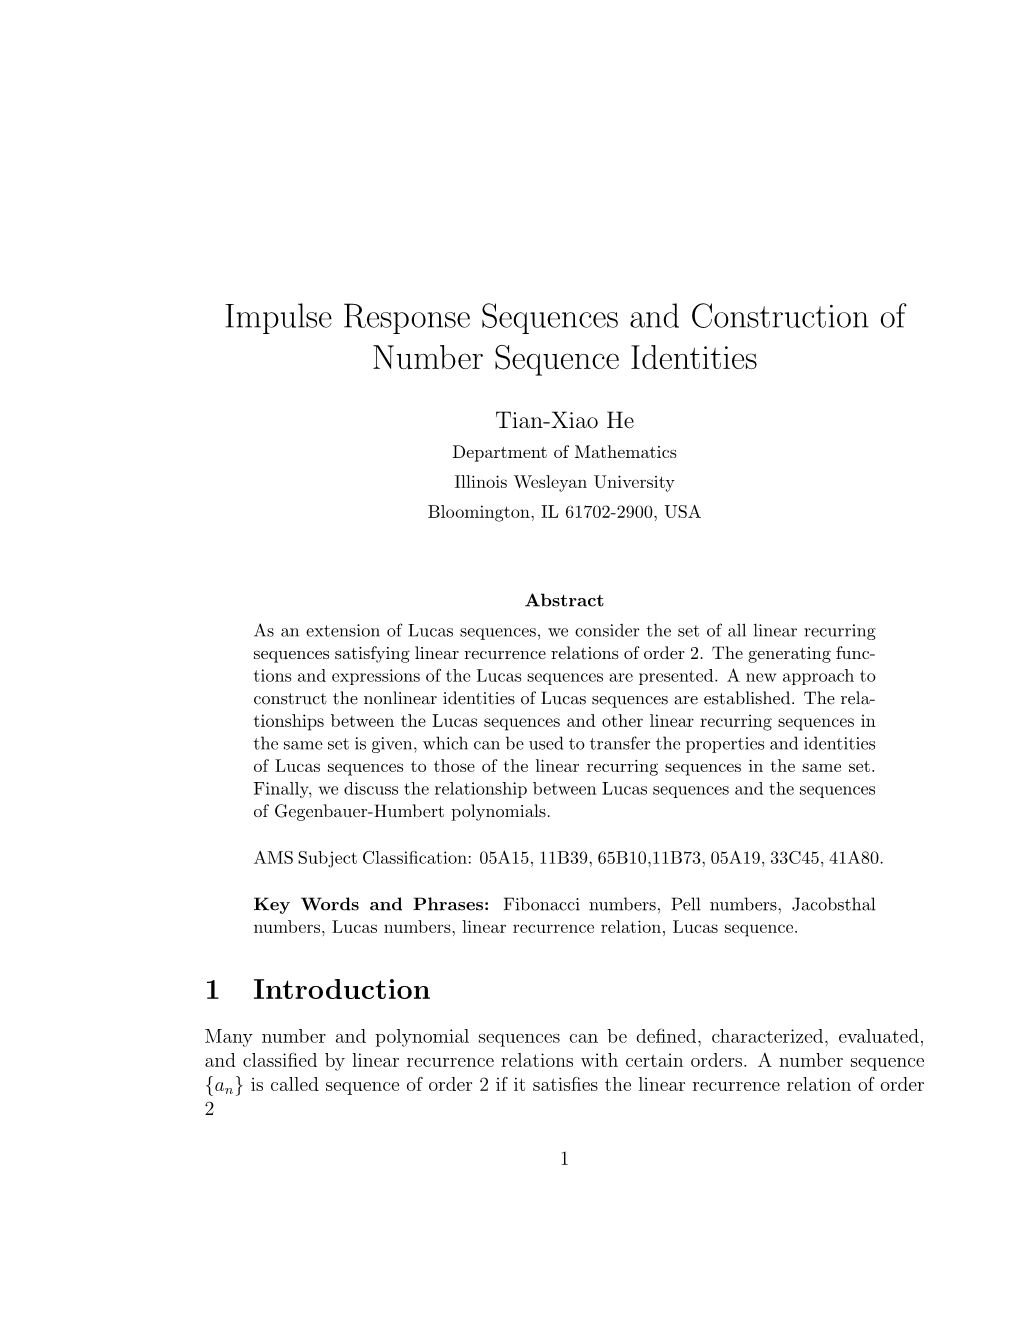 Impulse Response Sequences and Construction of Number Sequence Identities